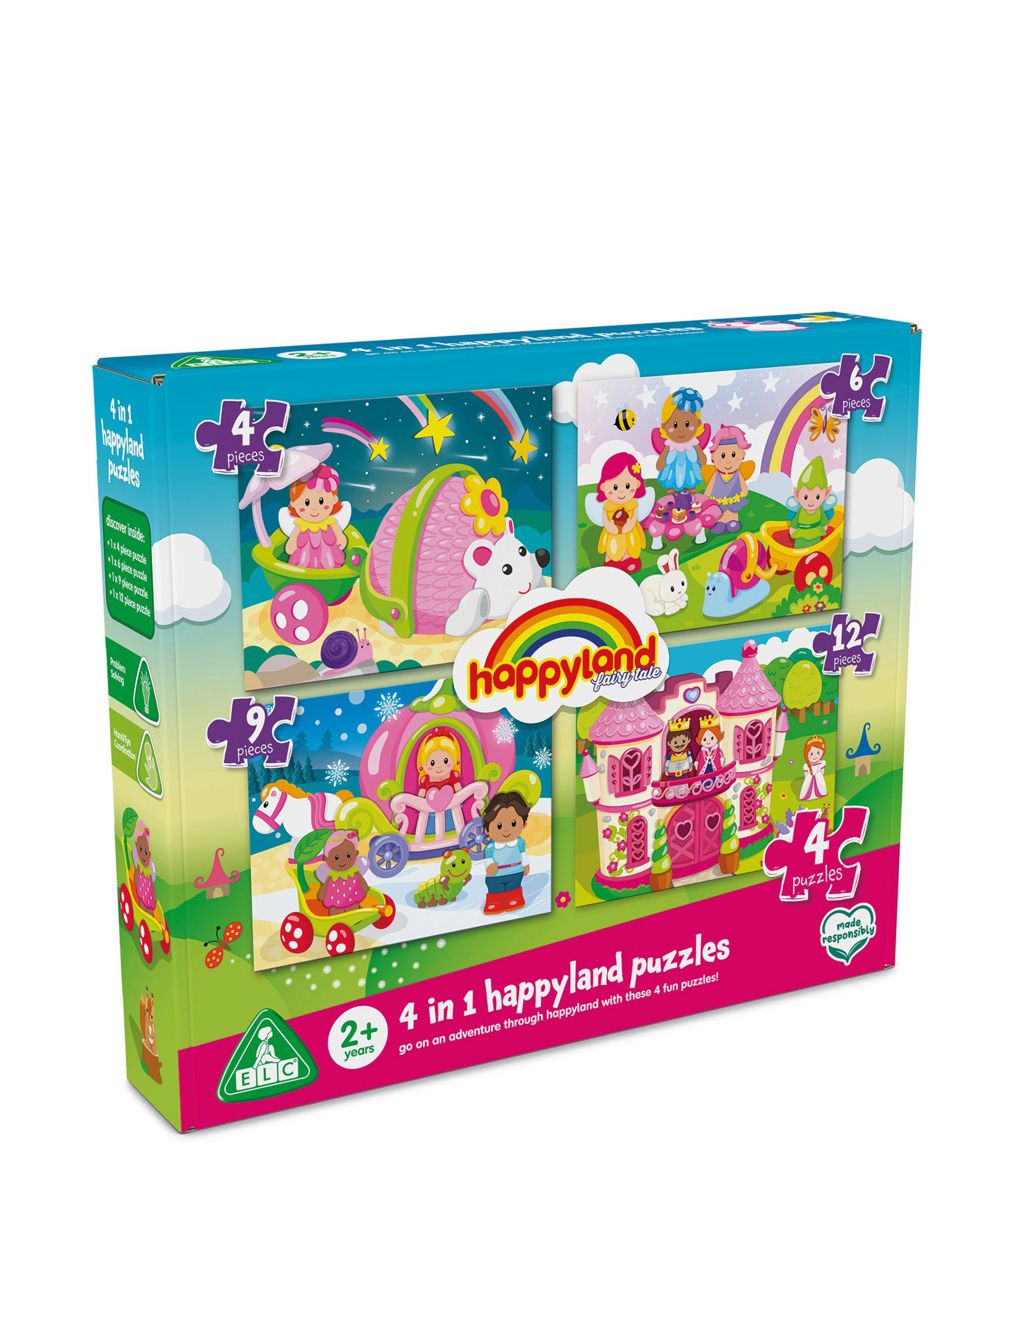 4 in 1 Happyland Puzzles Fairytale (2-5 Yrs)